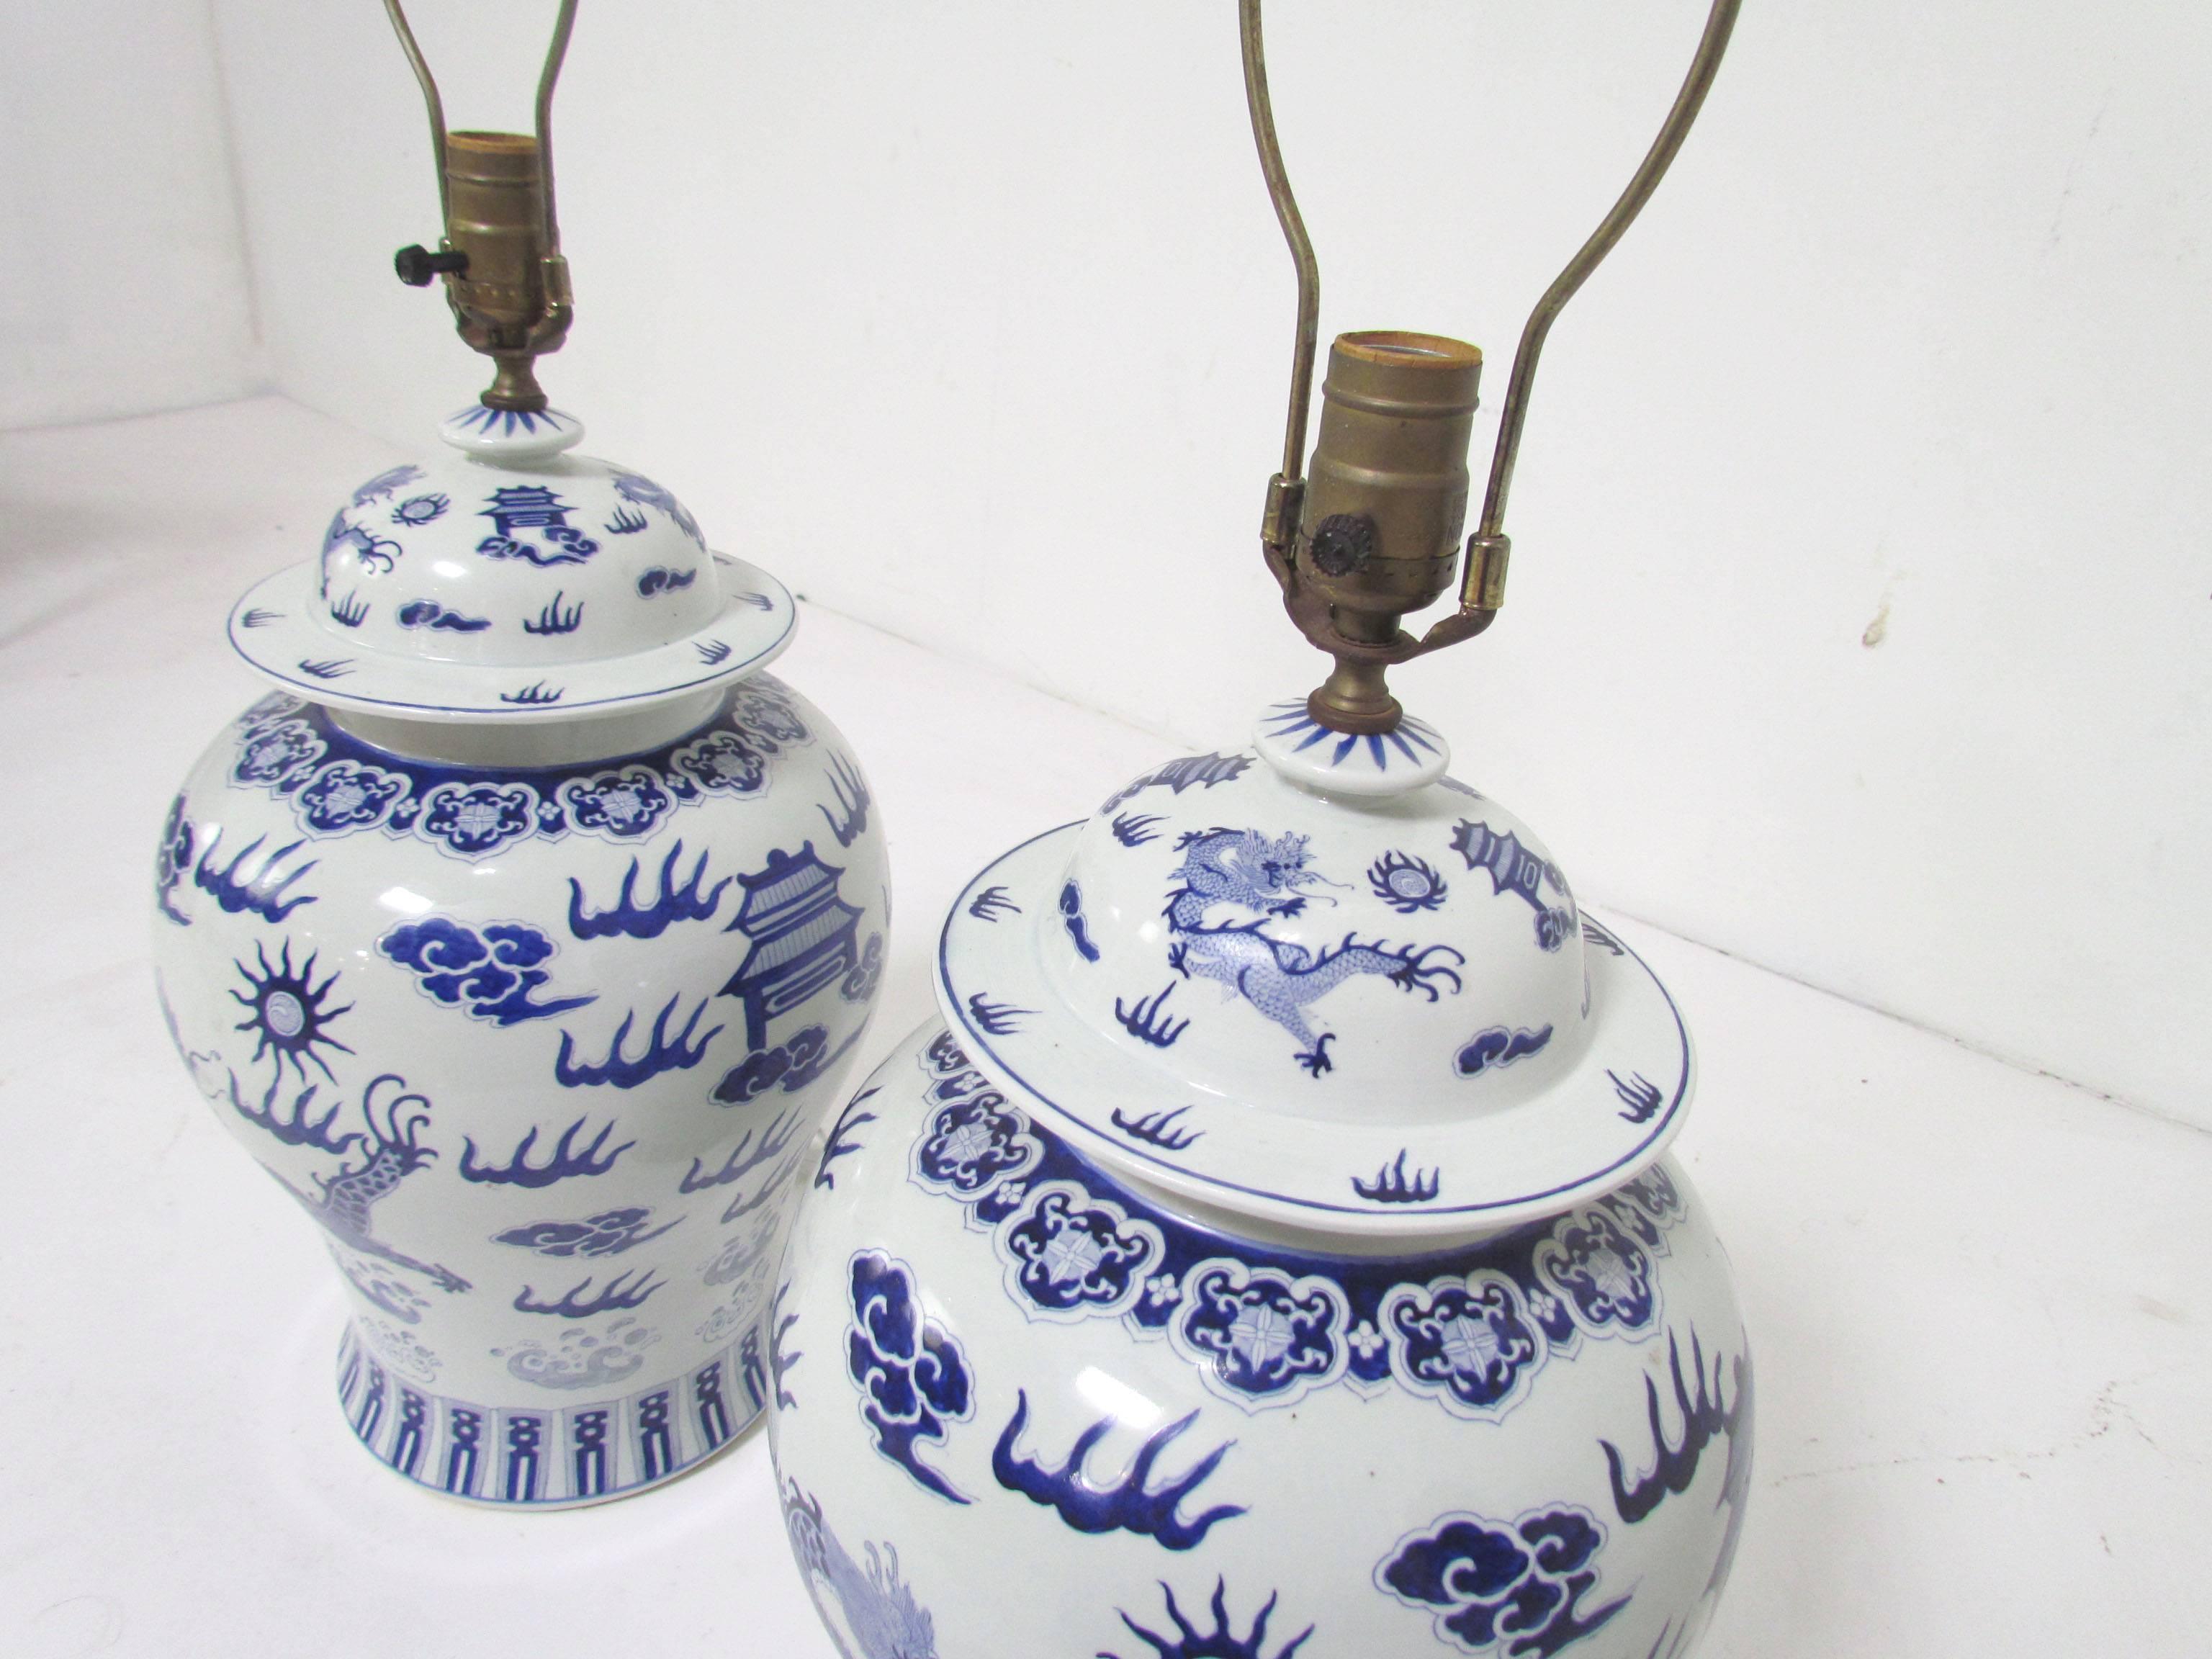 Porcelain Pair of Blue and White Ginger Jar Lamps with Dragon Motif